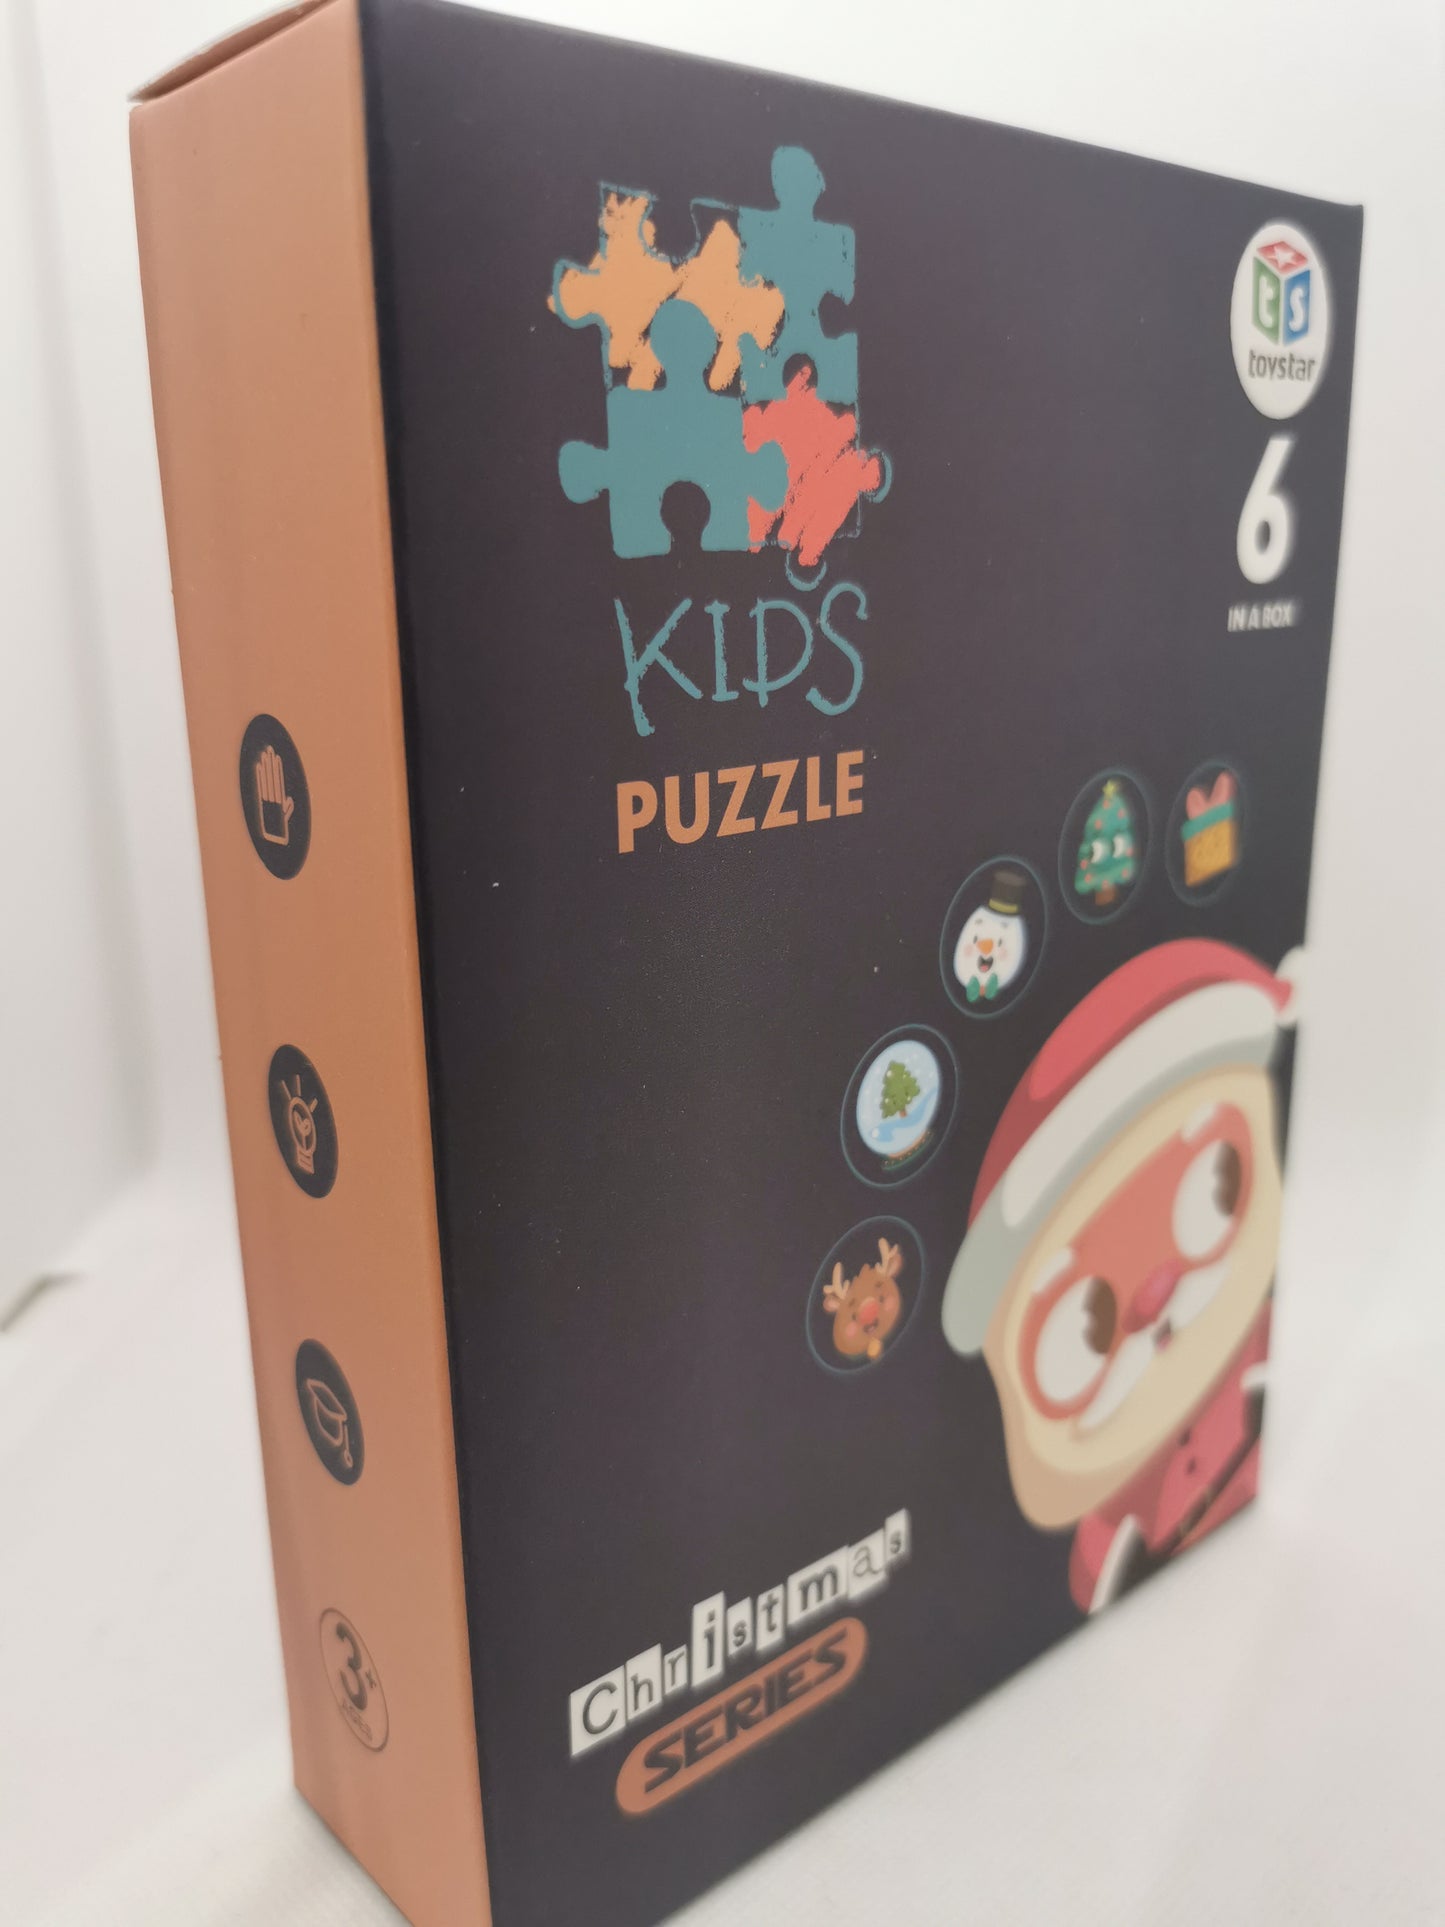 Kids Puzzle Christmas Series 6 in a Box